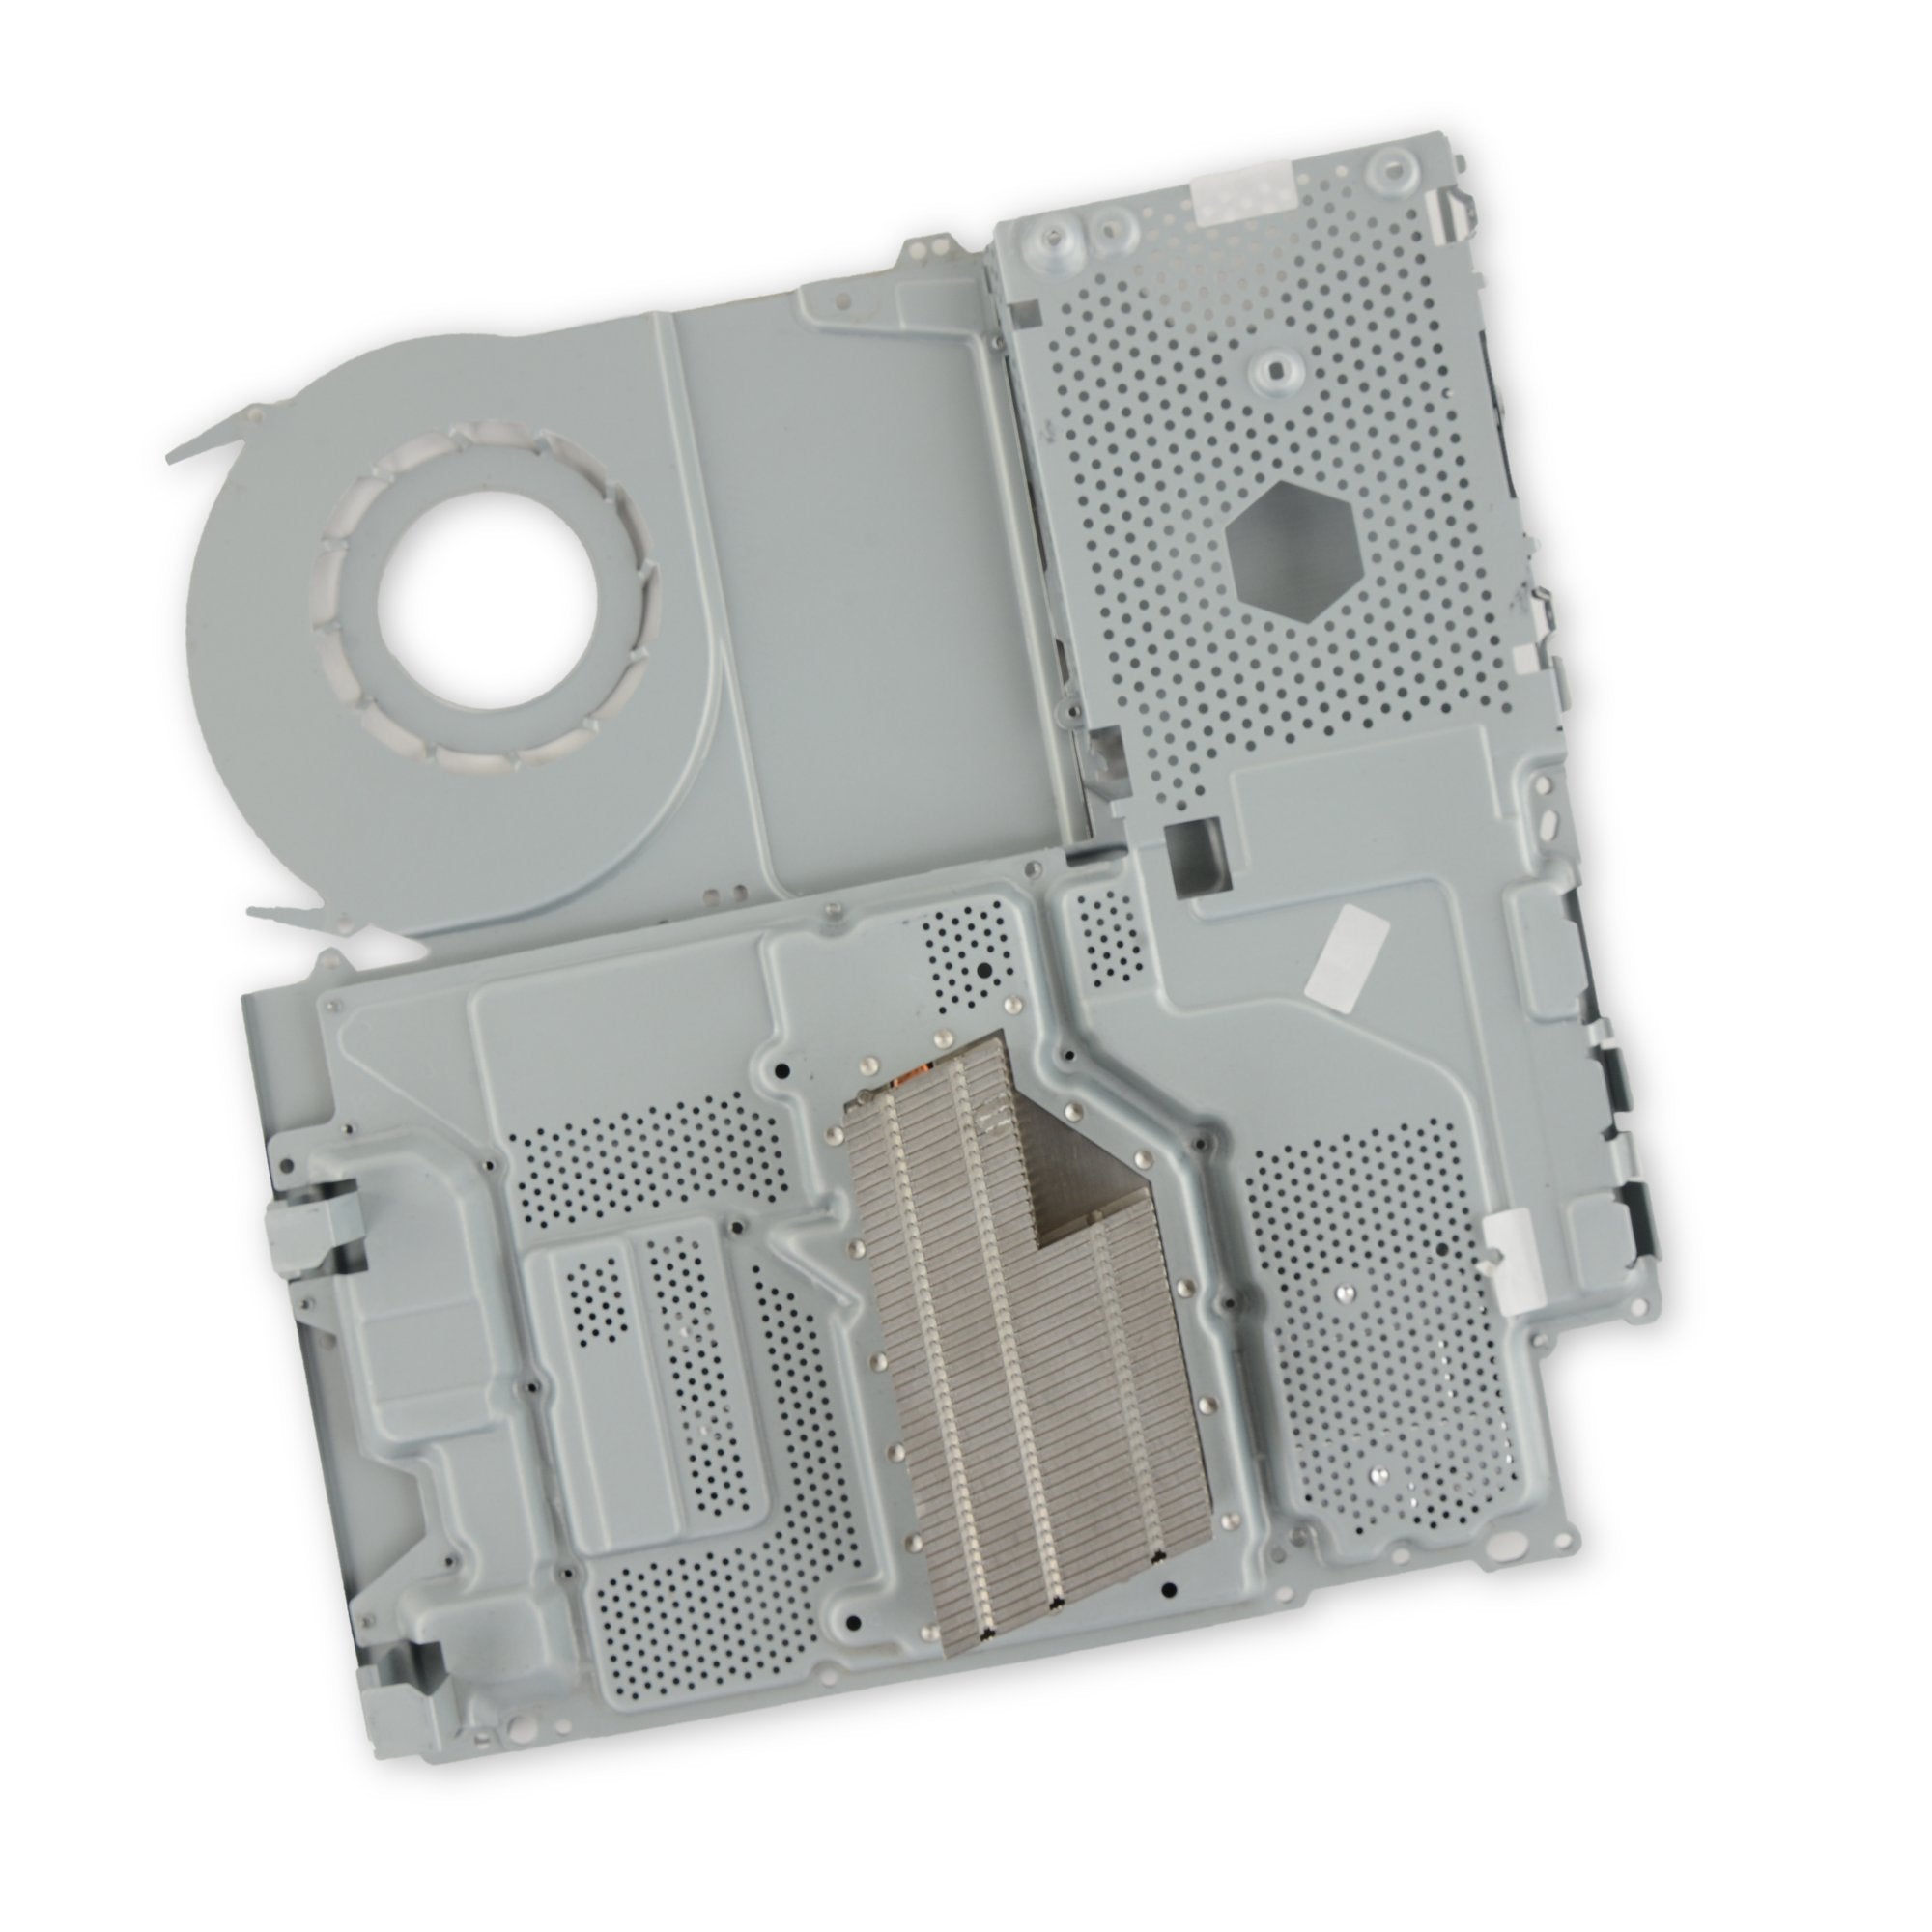 PlayStation 4 Heat Sink and Support Plate Assembly